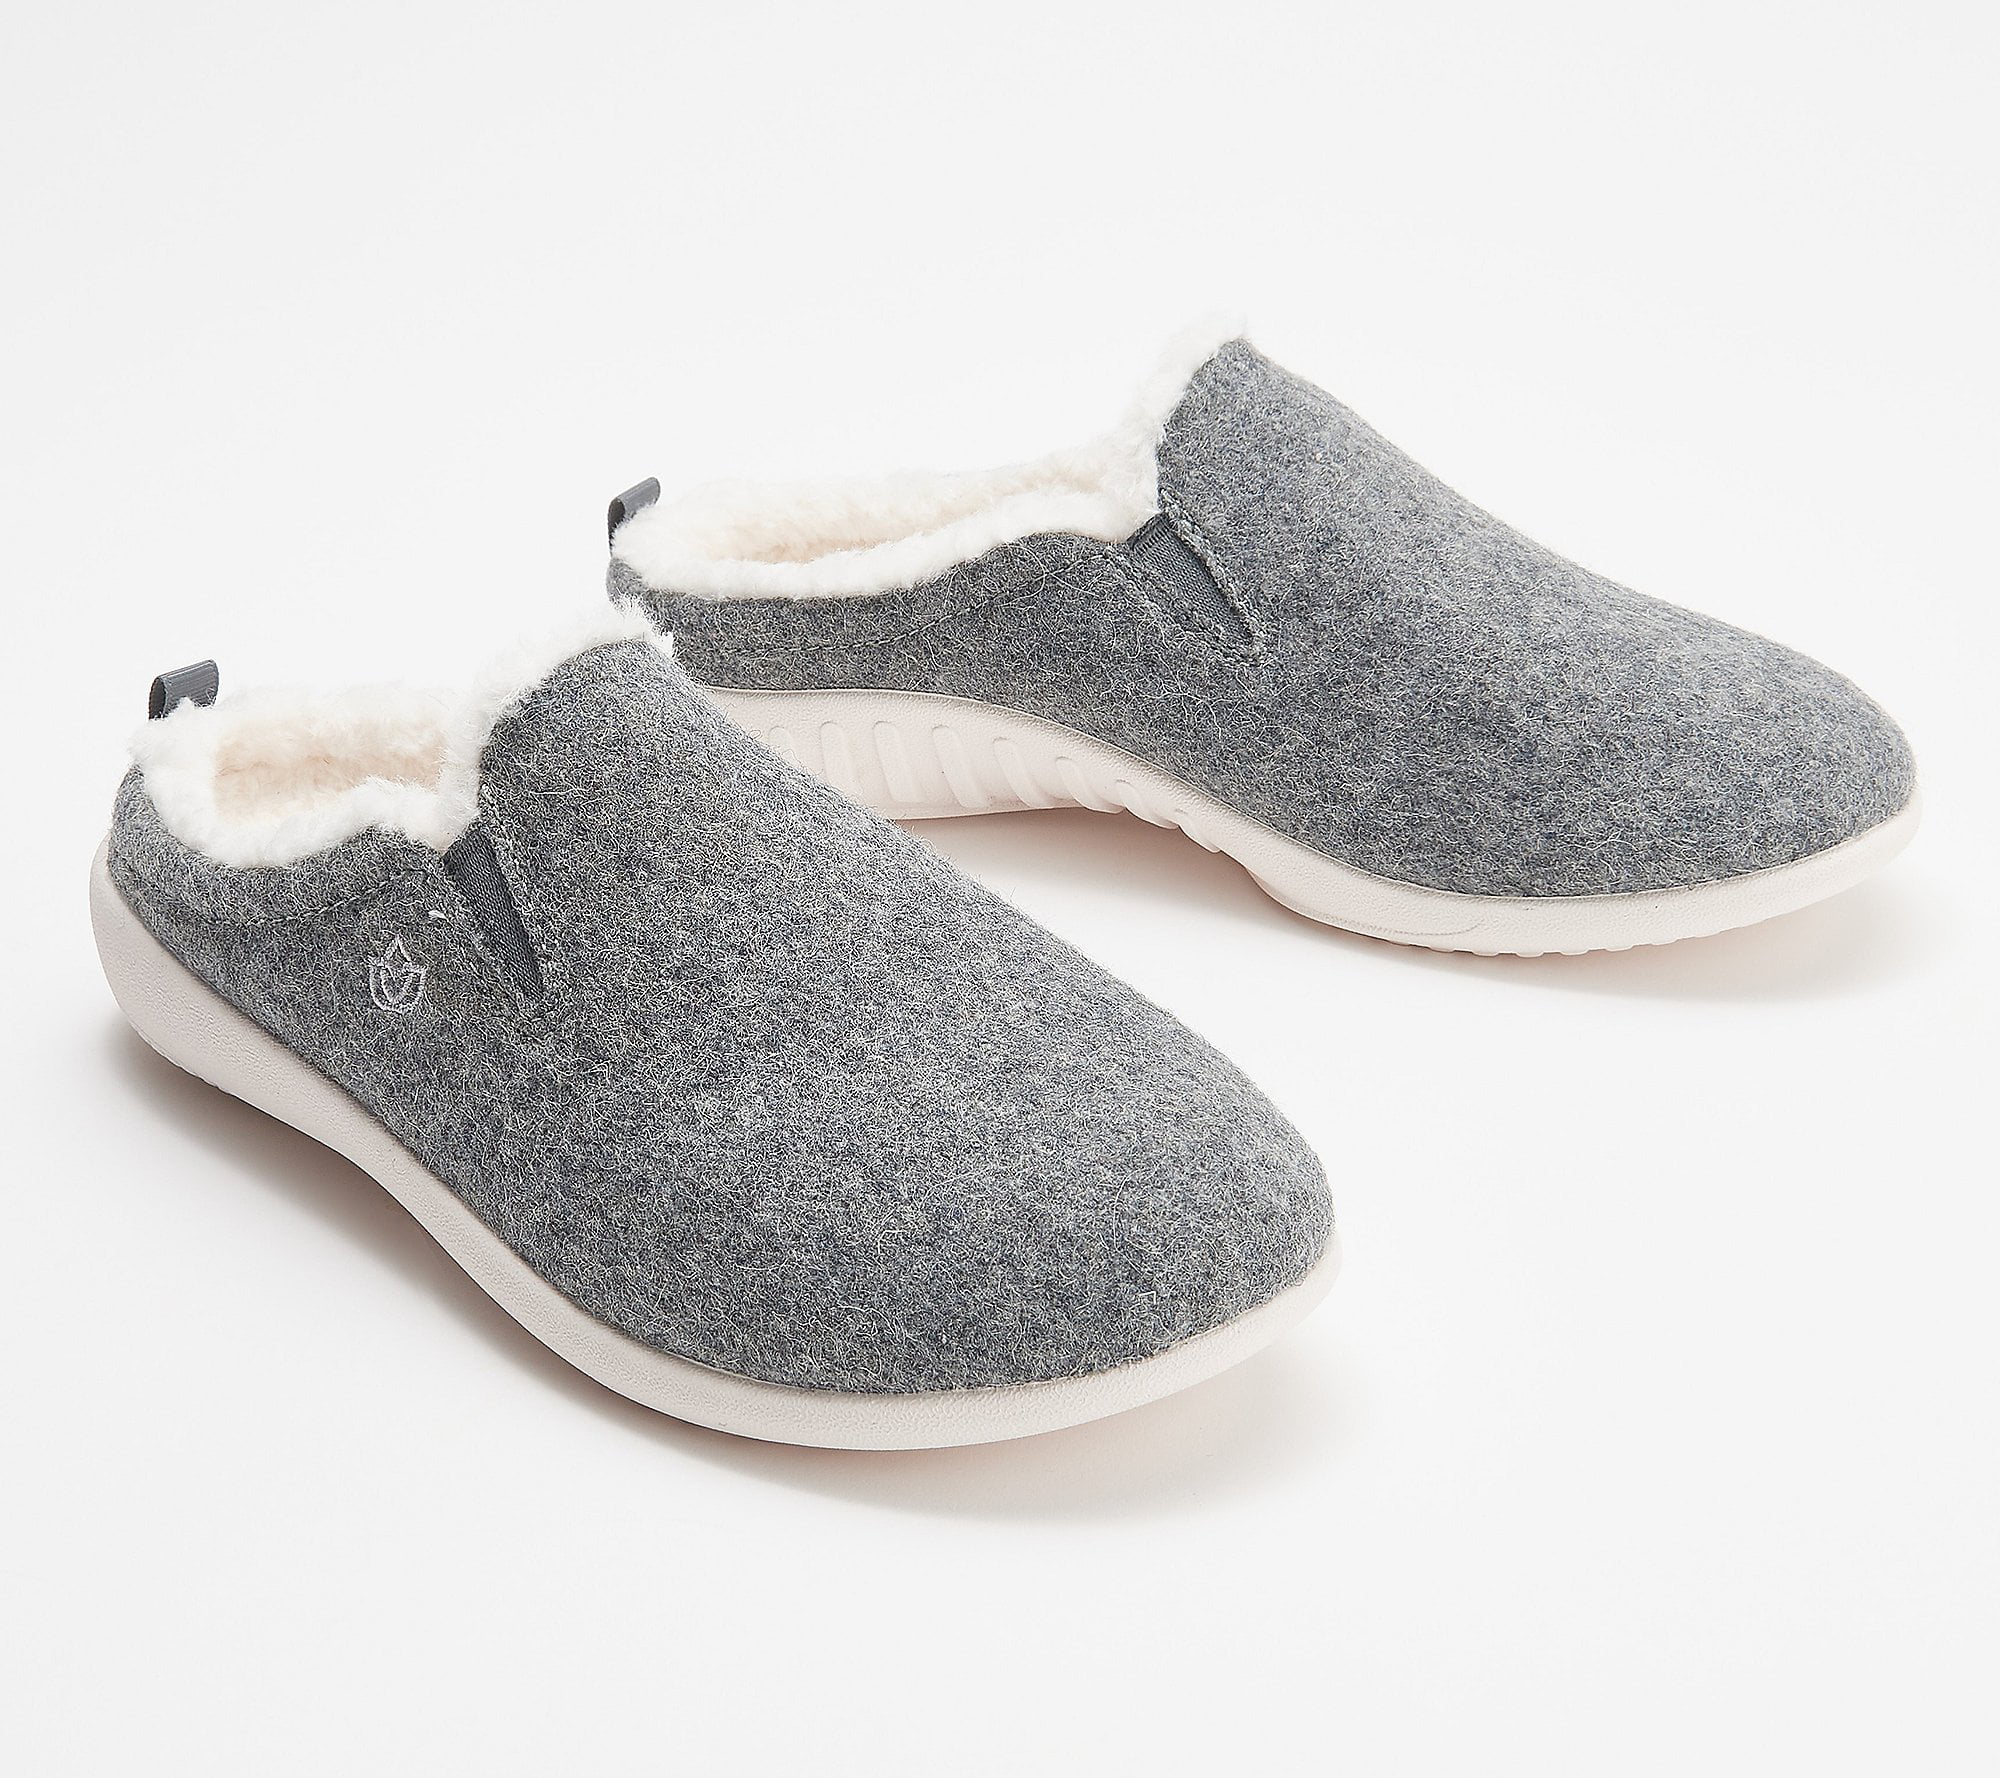 Spenco Arch Supportive Wool Slippers - Walmart.com